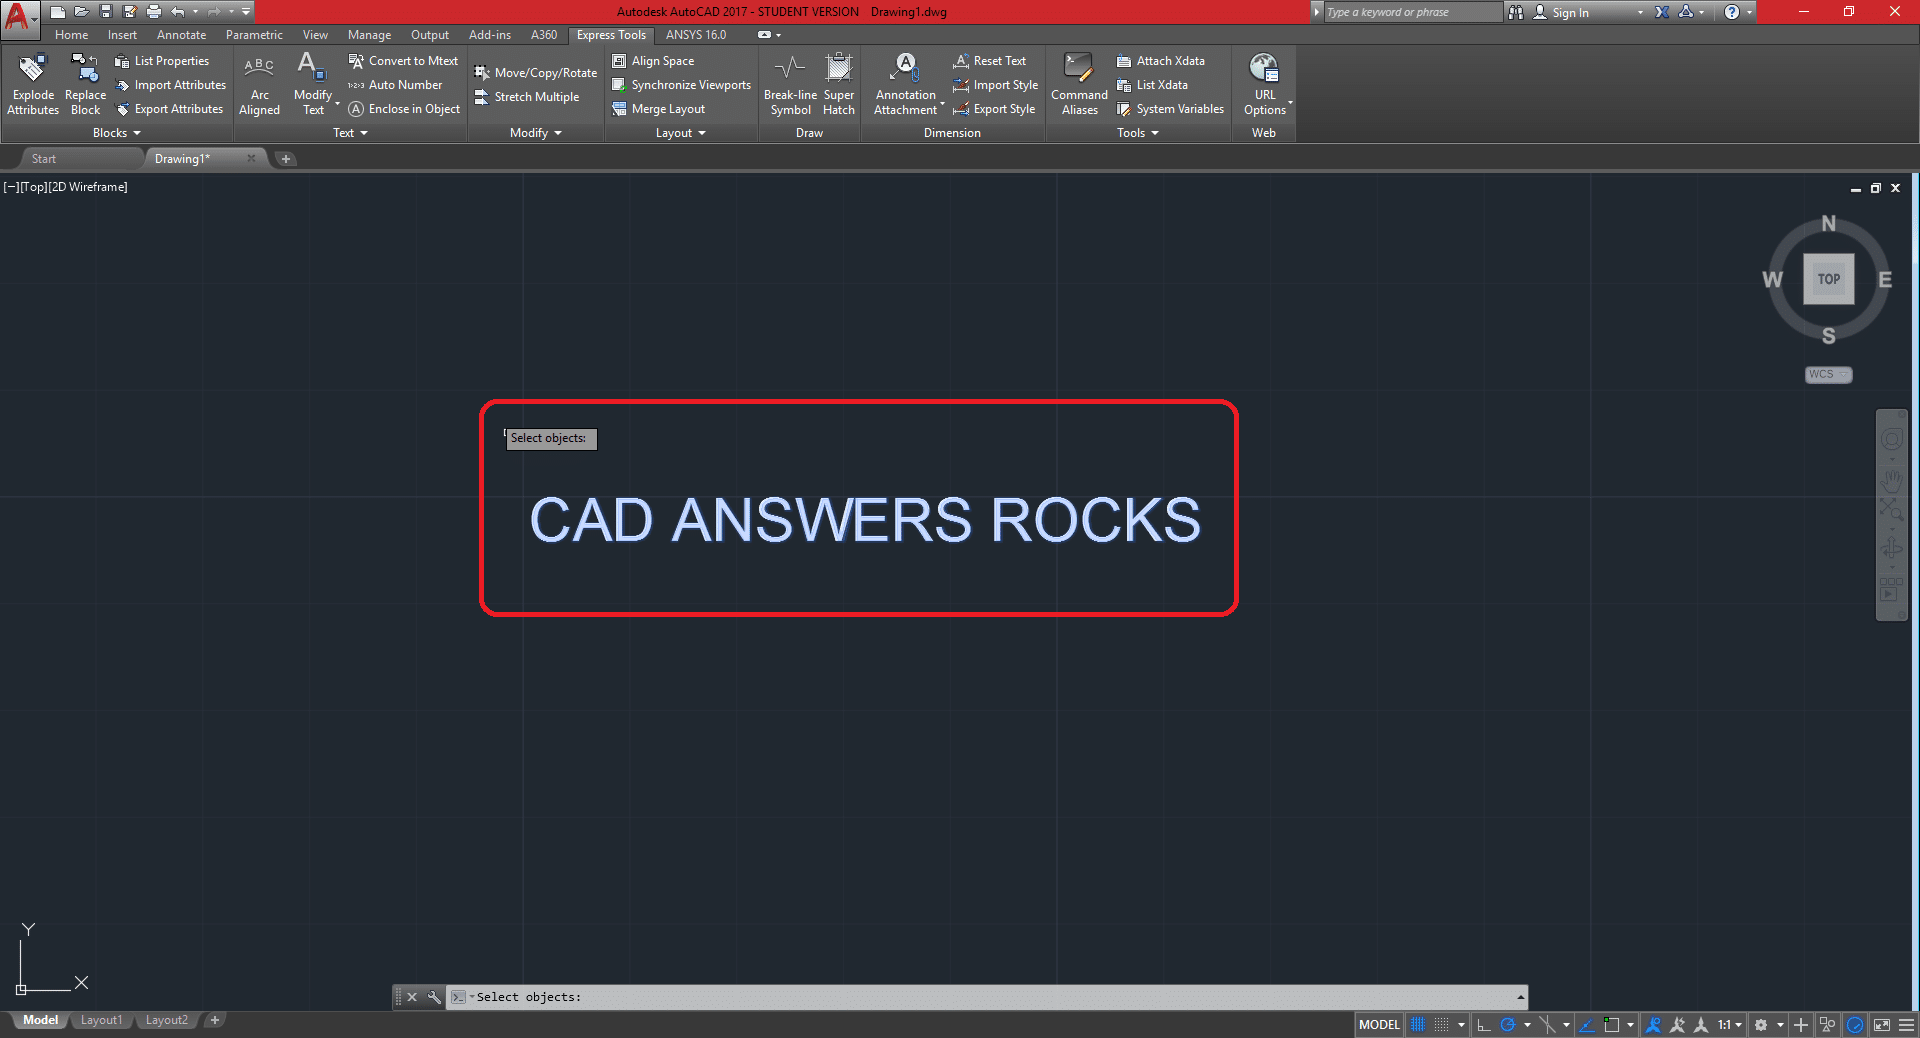 how to insert text in autocad